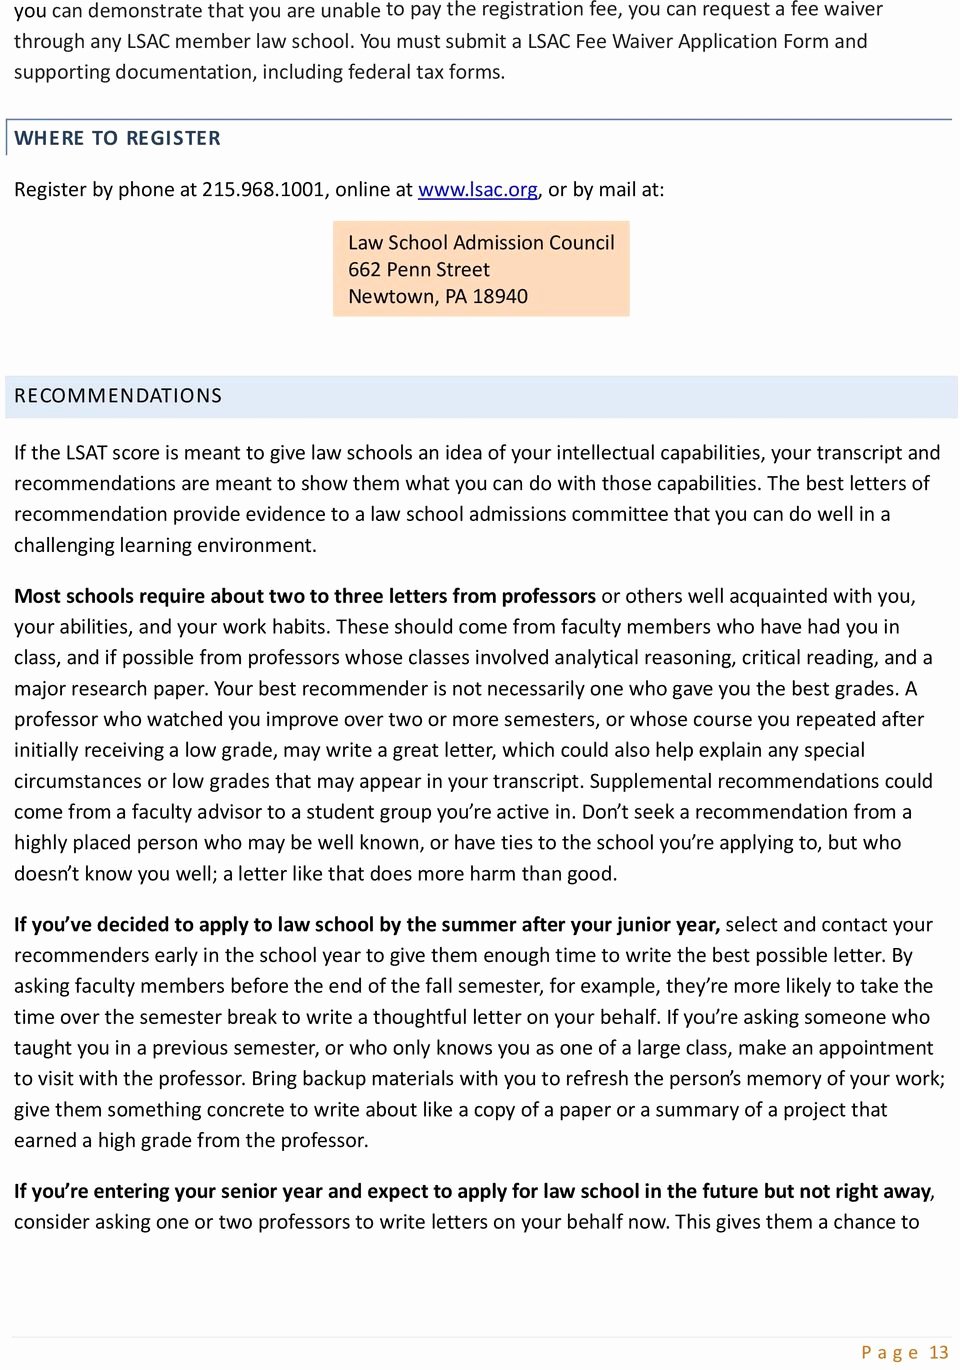 Lsac Letter Of Recommendation form Elegant Law School Admission A Umass Boston Student S Guide Pdf